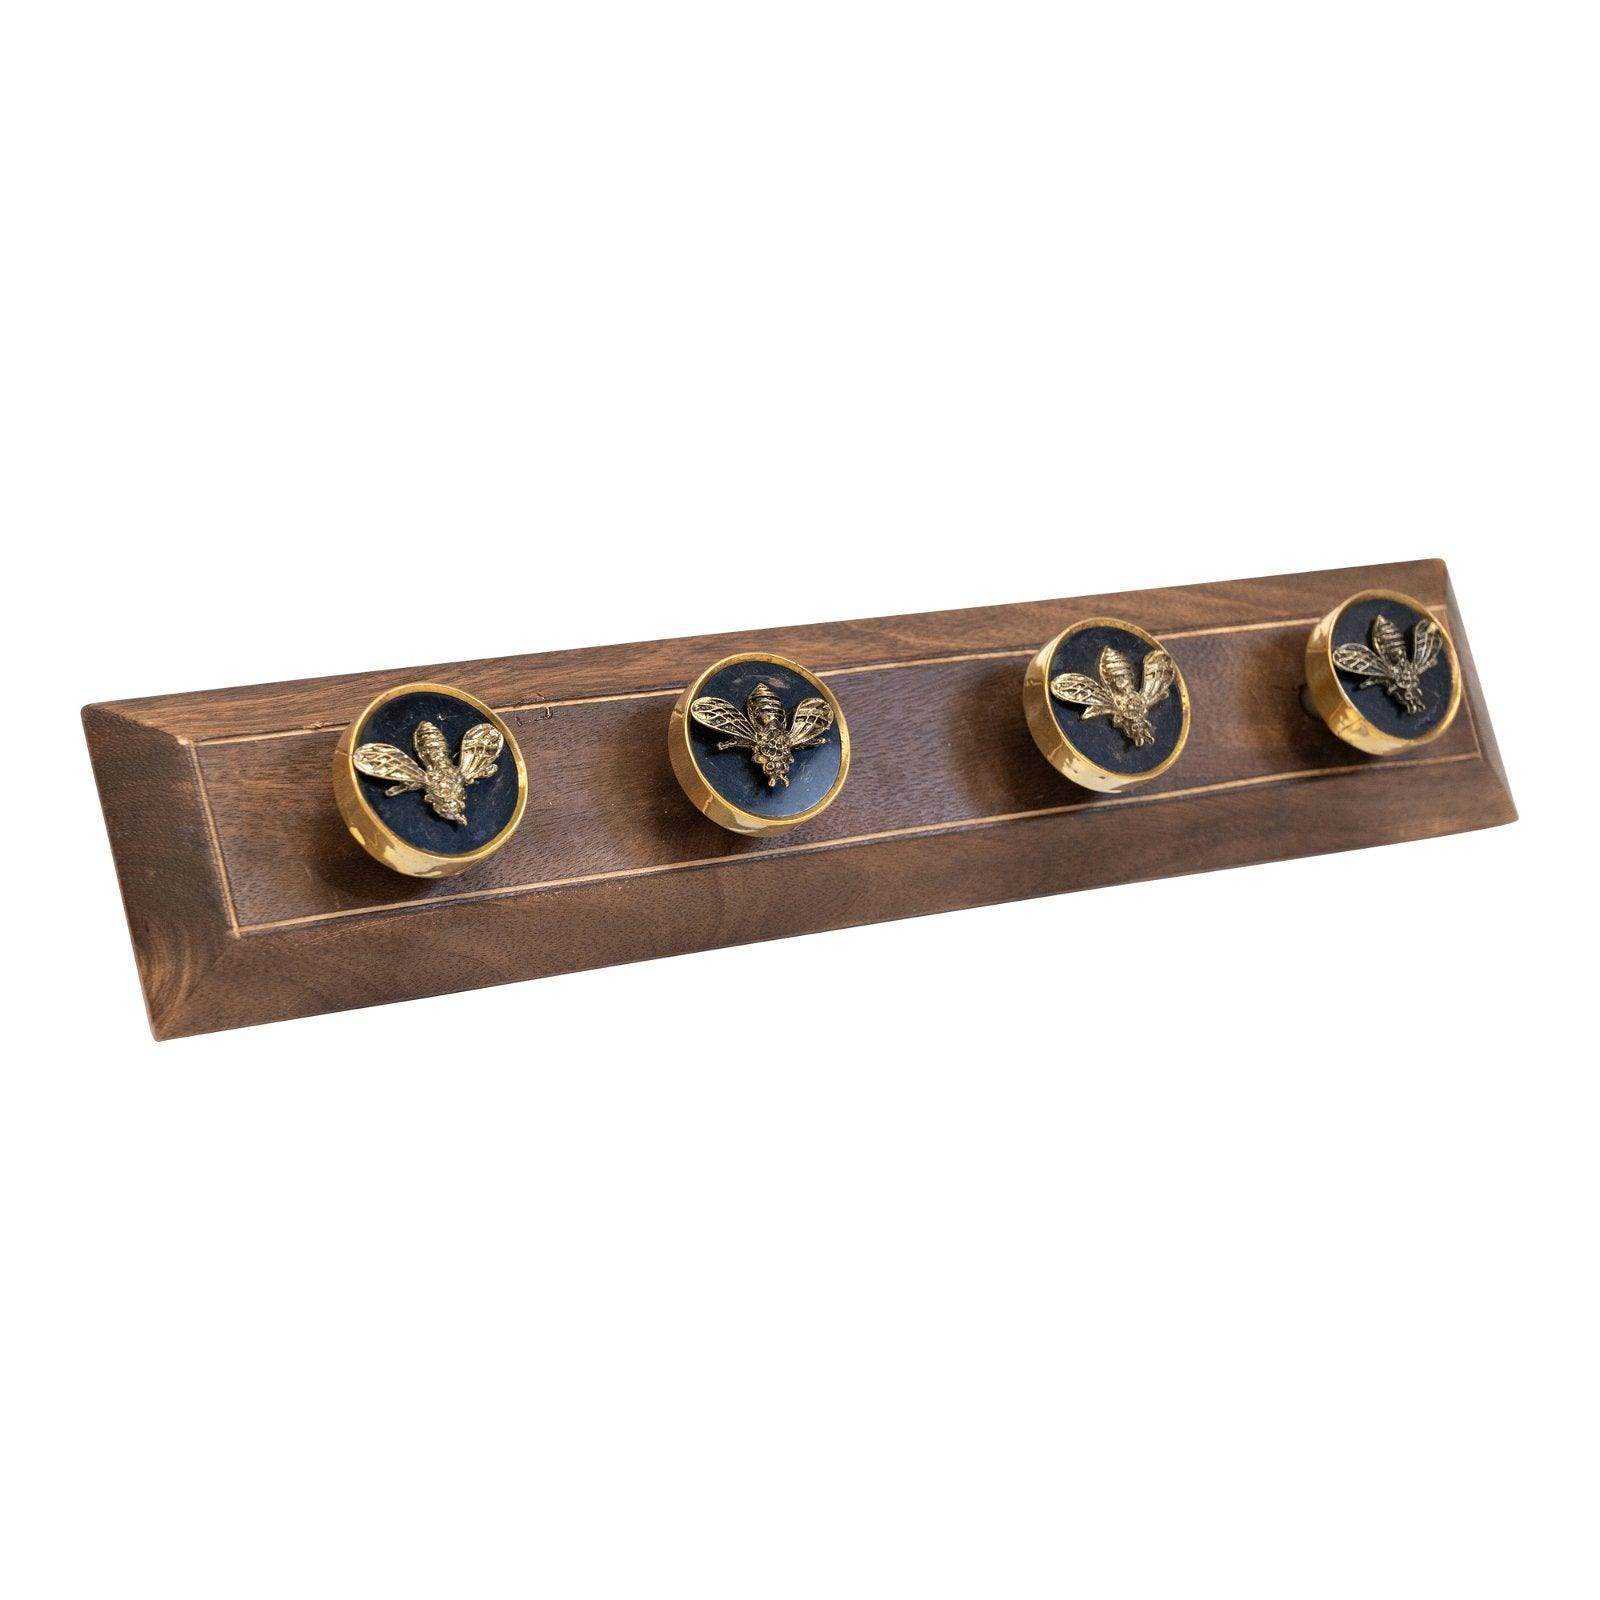 View Four Bee Design Coat Knobs On A Wooden Base information